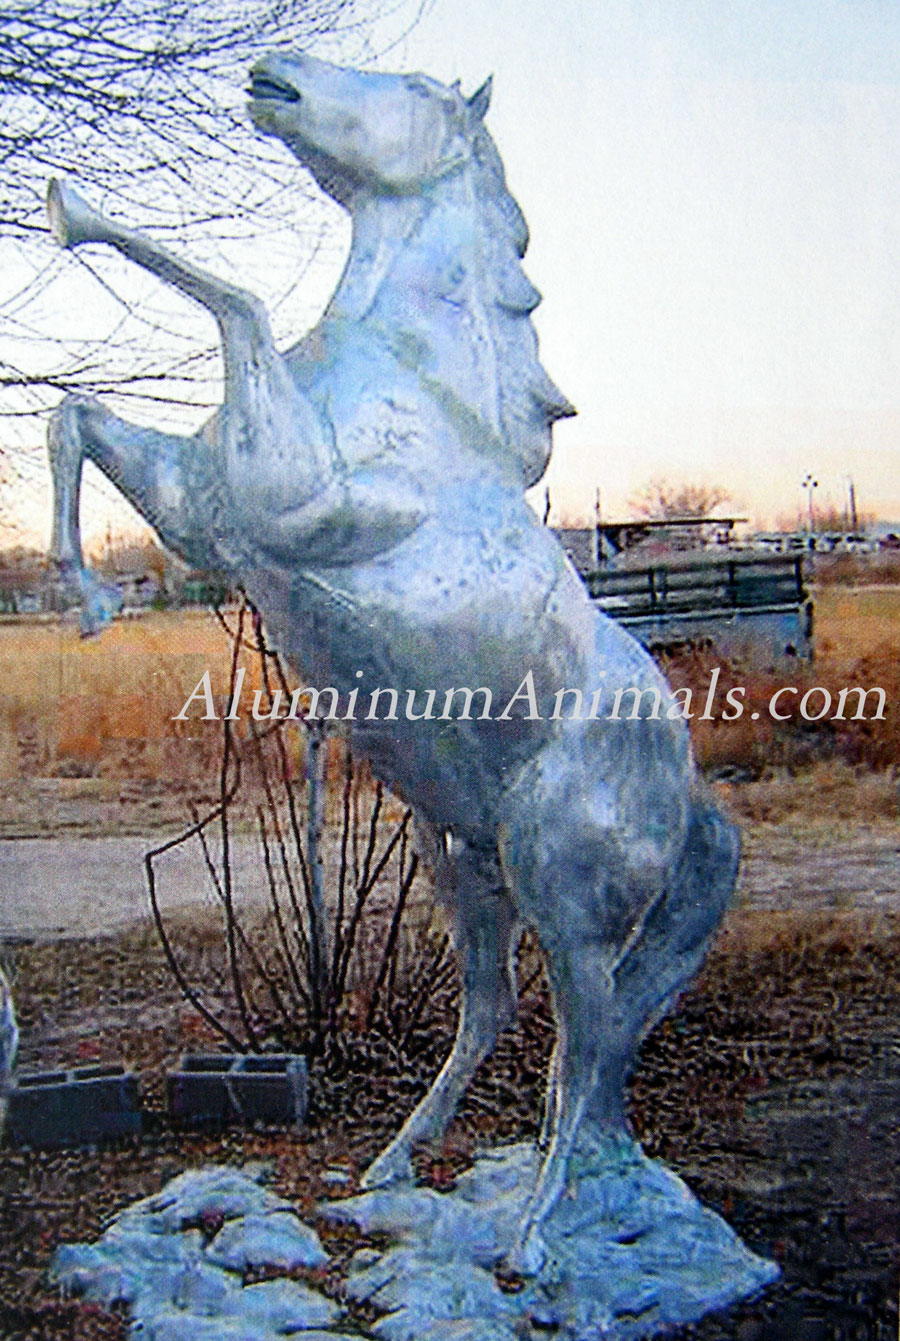 bronco rearing horse statue